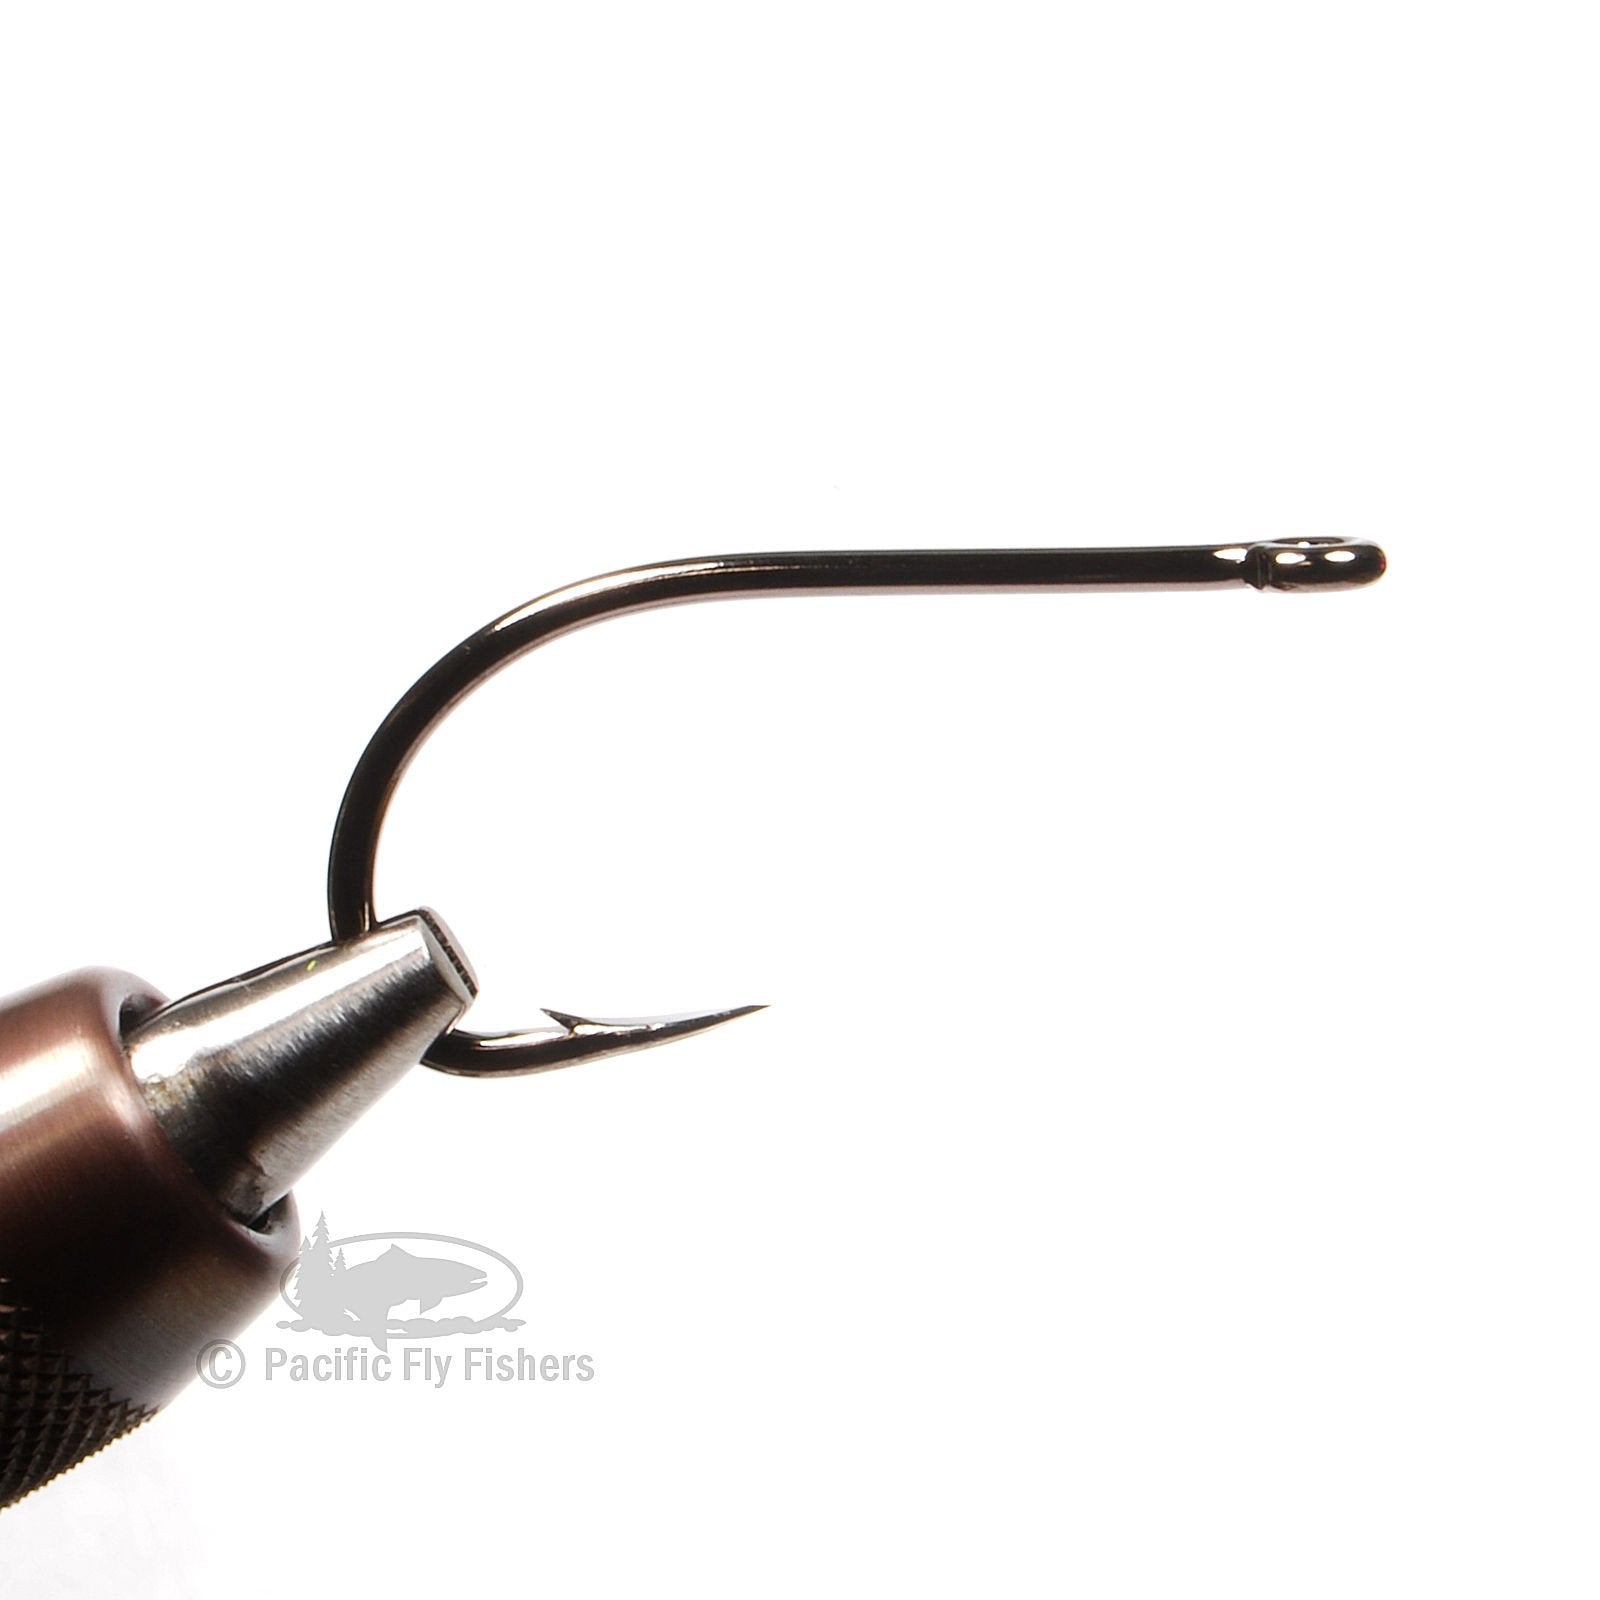 EZHooks Quality Fishing Hooks and Clasps — The Valley Tieless Fishing System